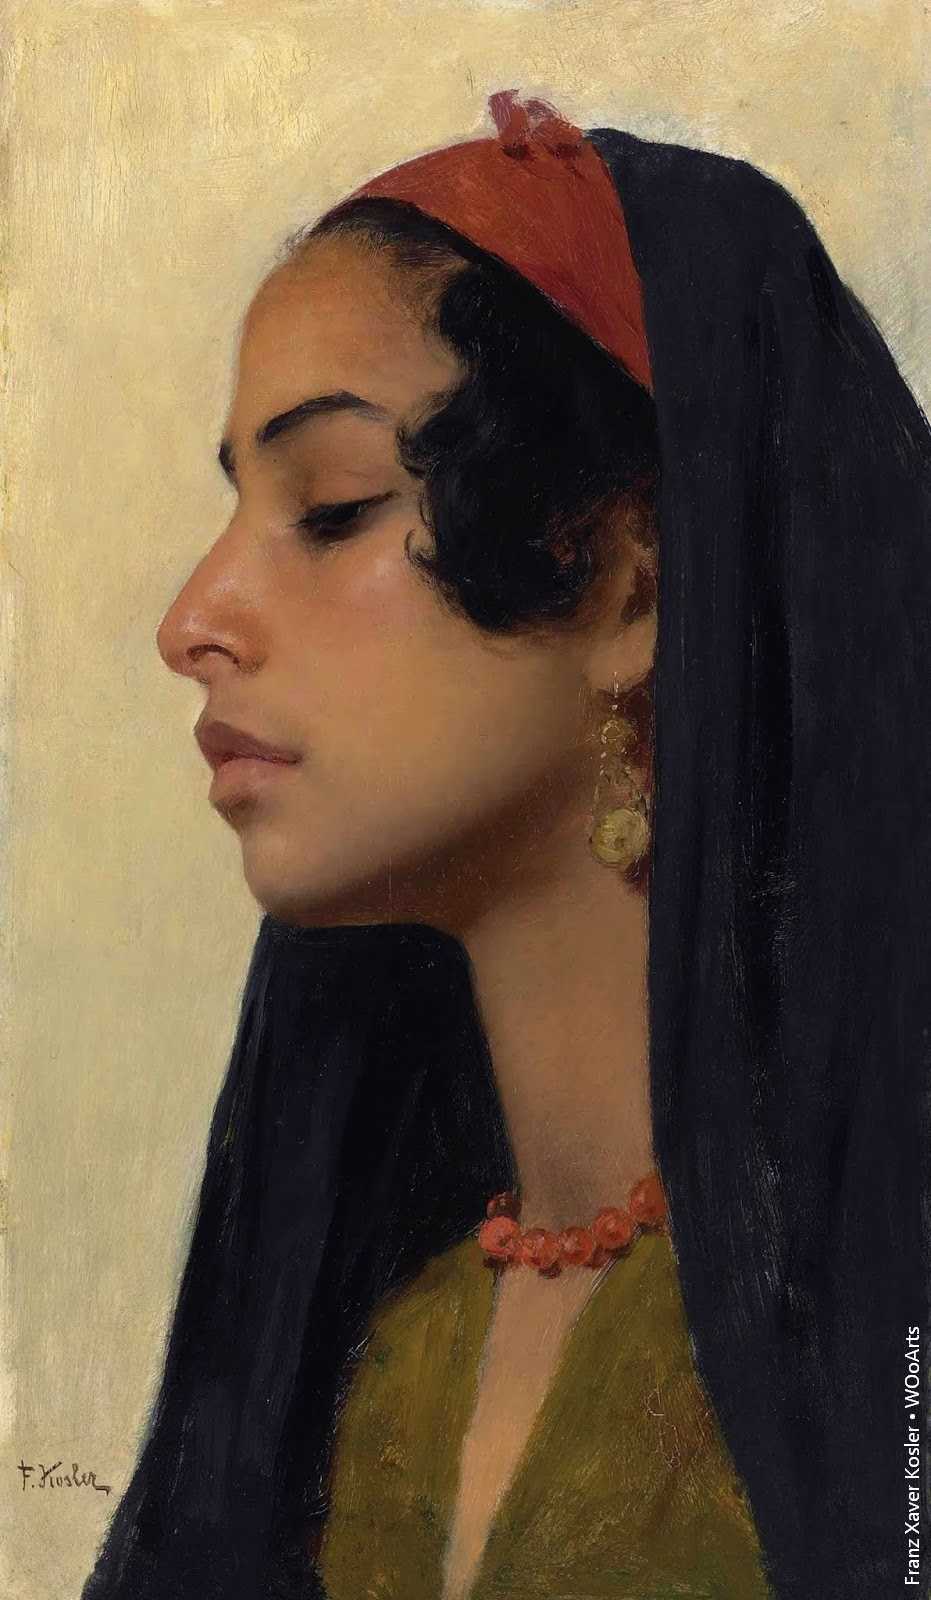 Painting by Franz Xaver Kosler